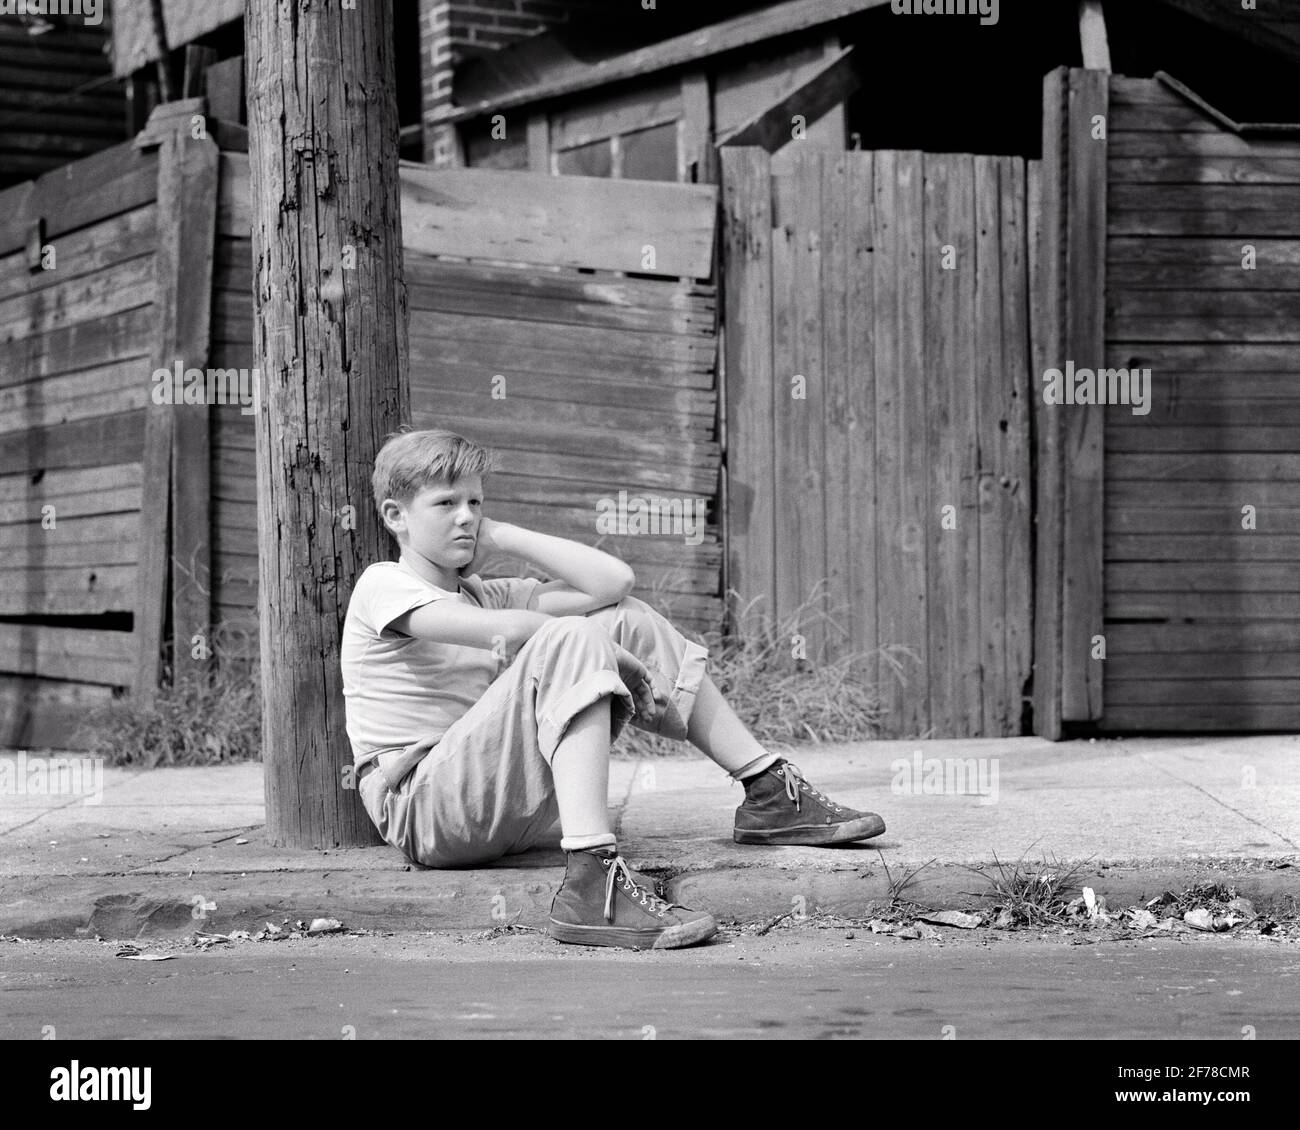 1940s 1950s SAD POOR SINGLE BOY SITTING ON CITY STREET CURB LEANING AGAINST TELEPHONE POLE WEARING DIRTY HIGH TOP SNEAKERS - w1546 HAR001 HARS POLE LOST LIFESTYLE MOODY POOR HOME LIFE COPY SPACE AGAINST FULL-LENGTH MALES RISK SNEAKERS TROUBLED B&W CONCERNED SADNESS DREAMS NEIGHBORHOOD WELFARE LOW ANGLE ABANDONED MOOD GLUM CURB DISADVANTAGED DISAFFECTED DISAPPOINTED DISCONNECTED IMPOVERISHED JUVENILES MISERABLE NEGLECTED PRE-TEEN PRE-TEEN BOY SLUM BLACK AND WHITE CAUCASIAN ETHNICITY DISTRAUGHT HAR001 OLD FASHIONED Stock Photo